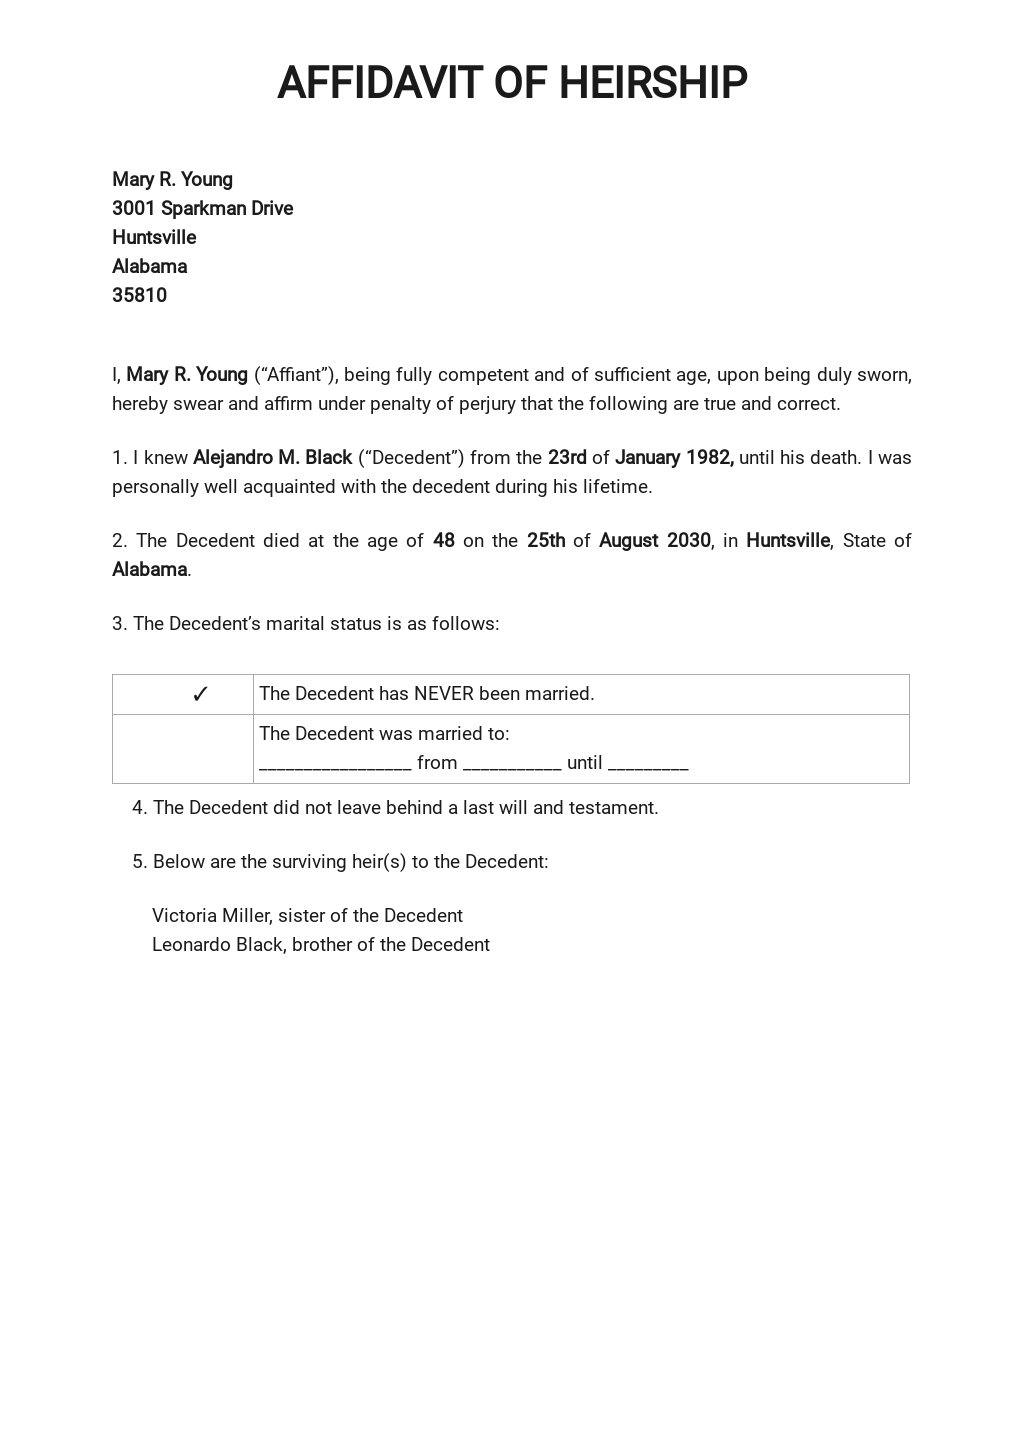 affidavit-of-heirship-template-fillable-printable-online-forms-images